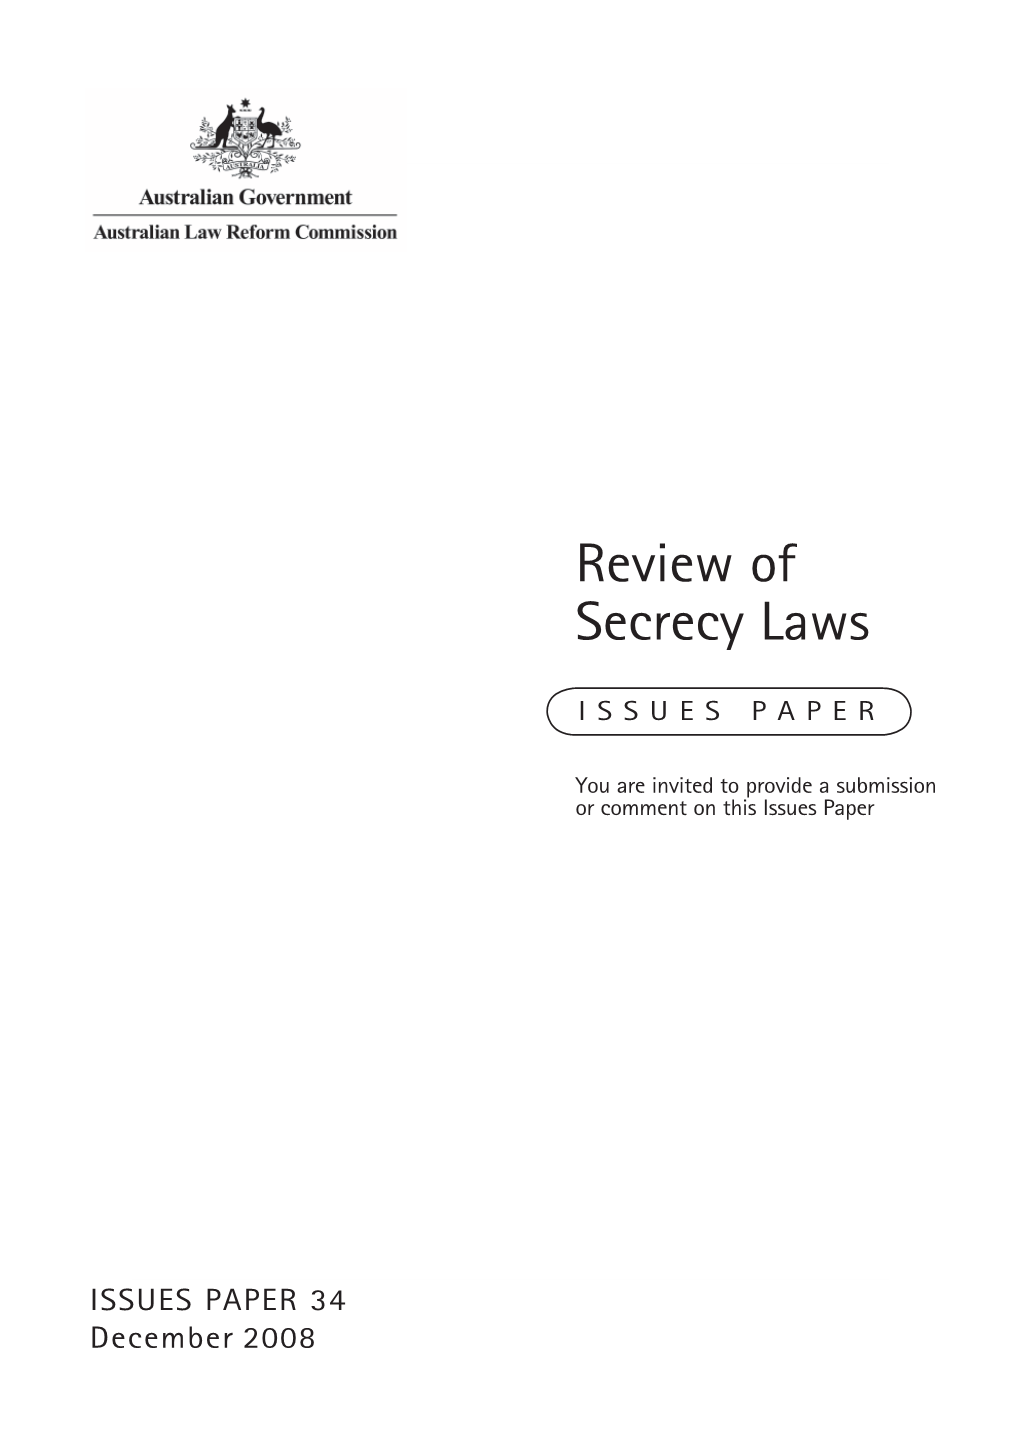 Review of Secrecy Laws